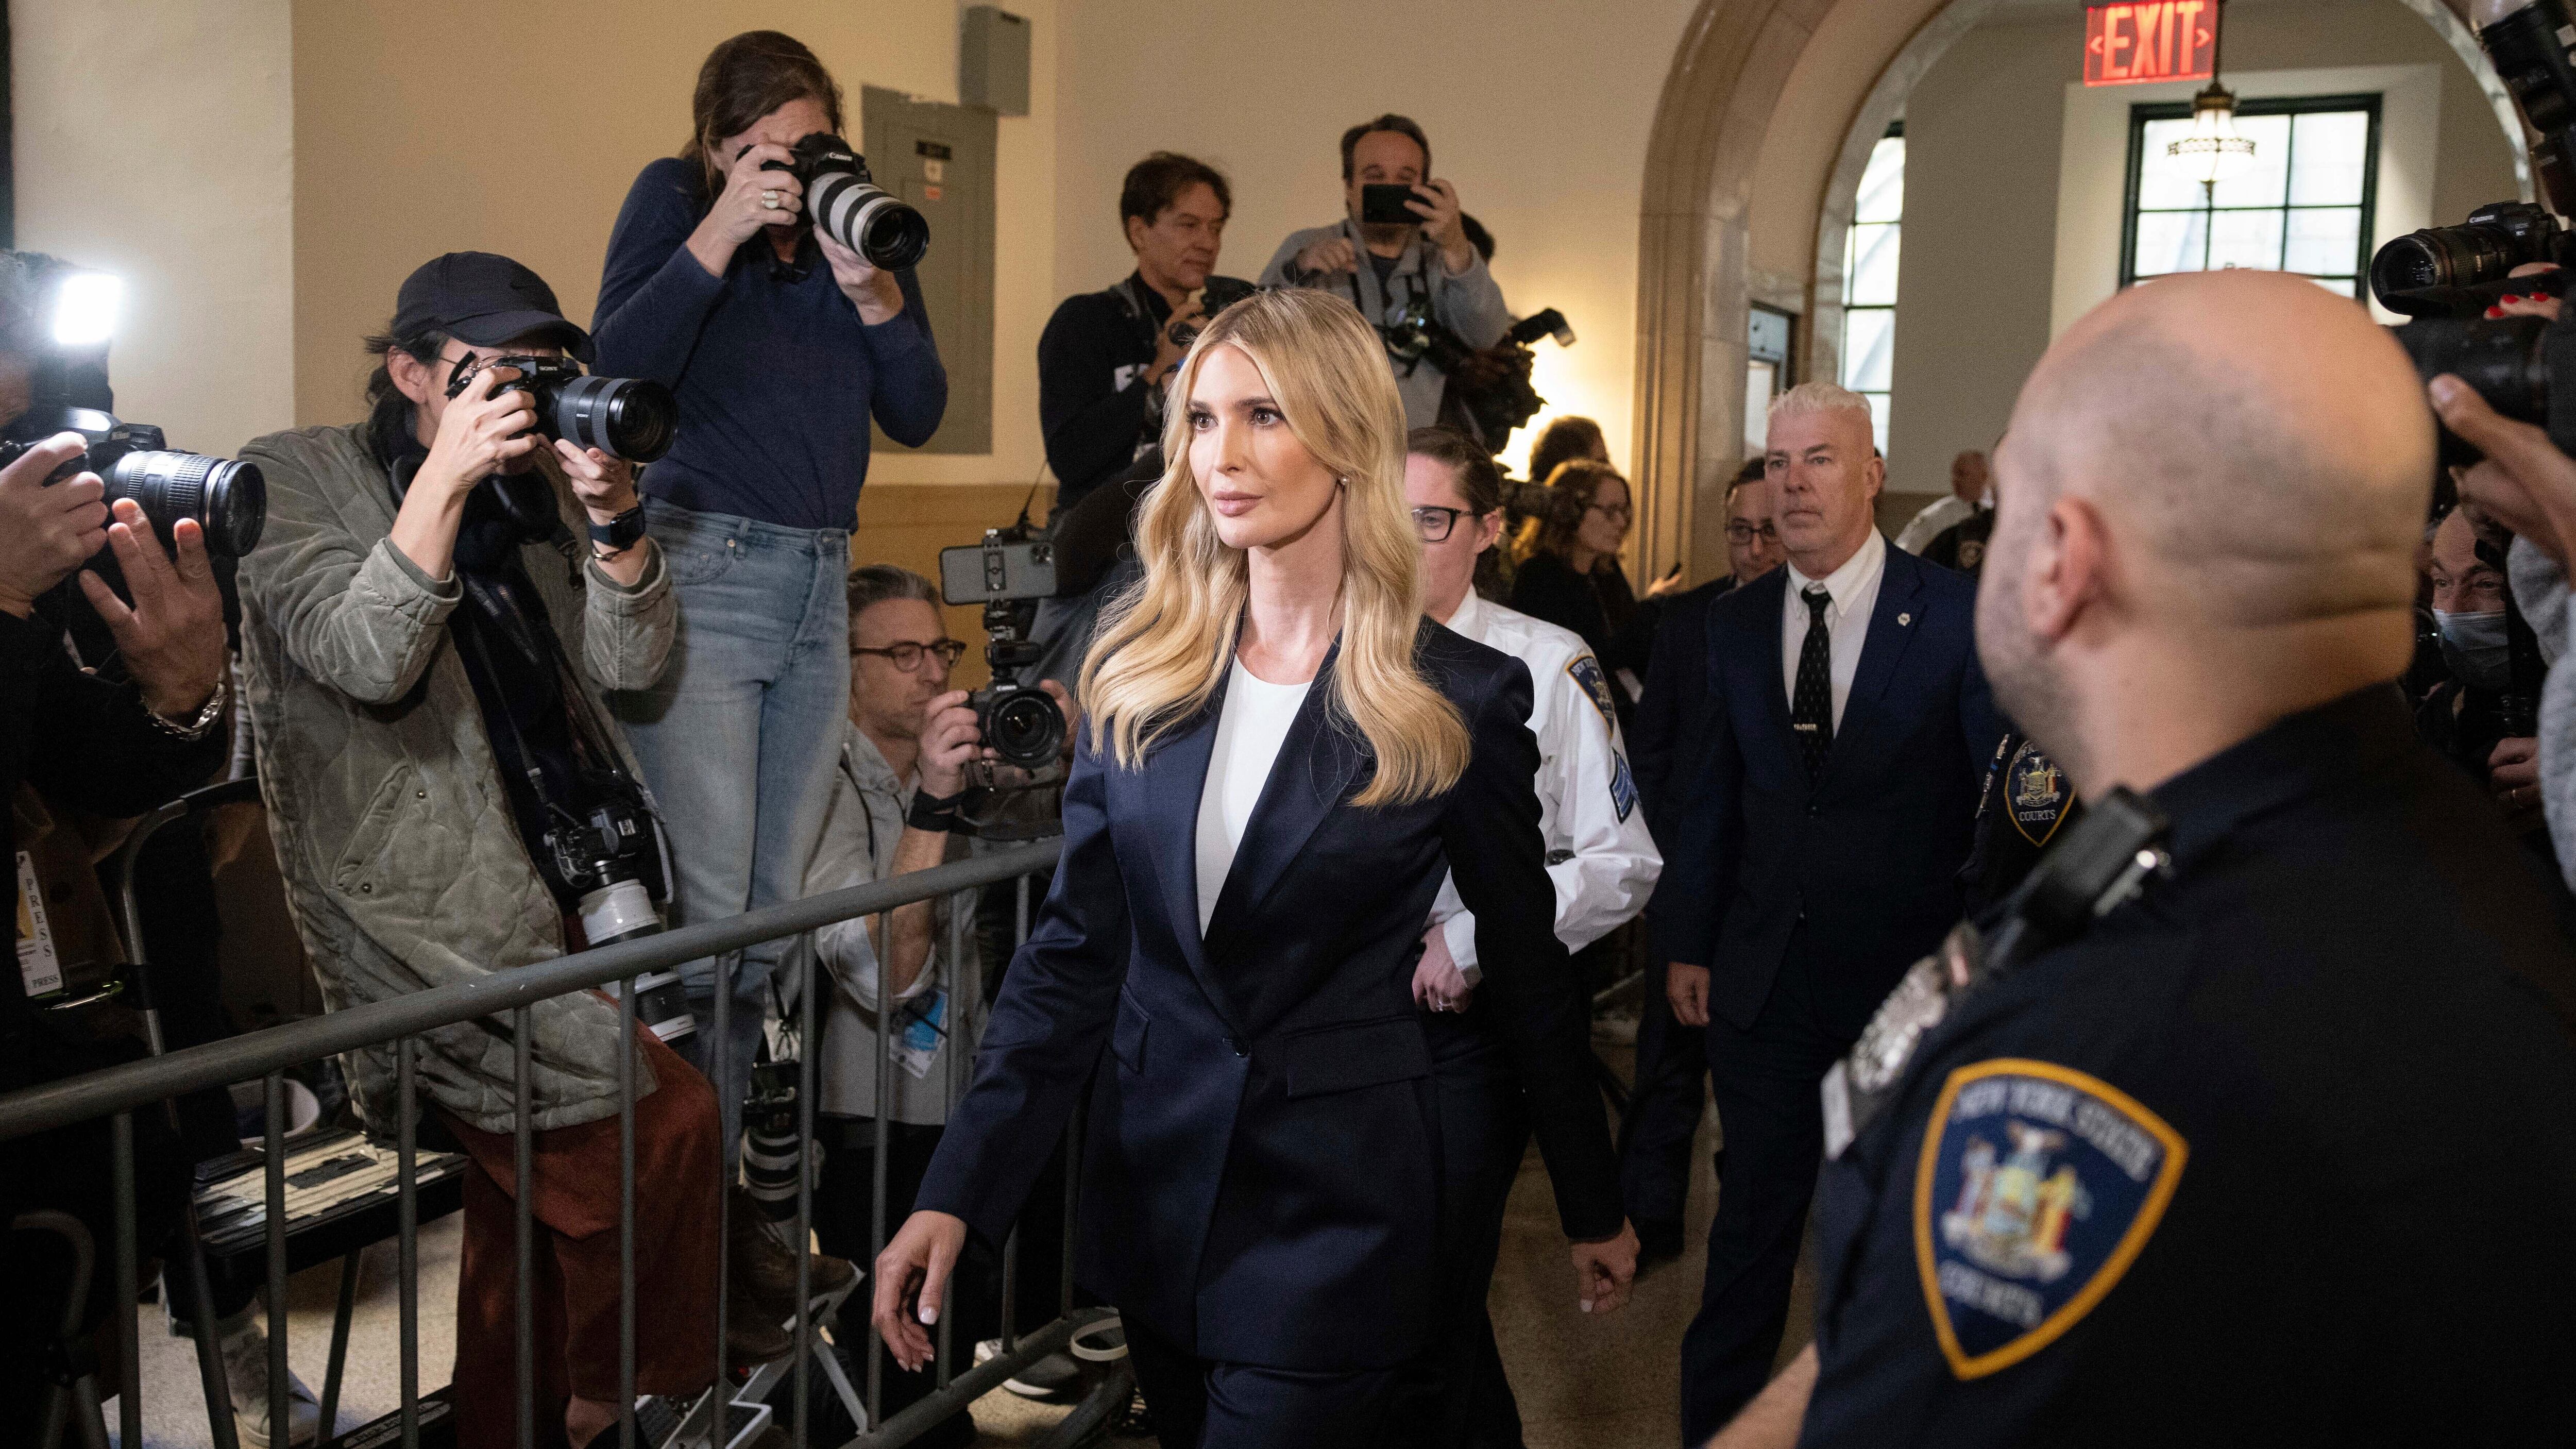 Ivanka Trump arrives at the courtroom for the fraud trial featuring her father and brothers (AP Photo/Yuki Iwamura)